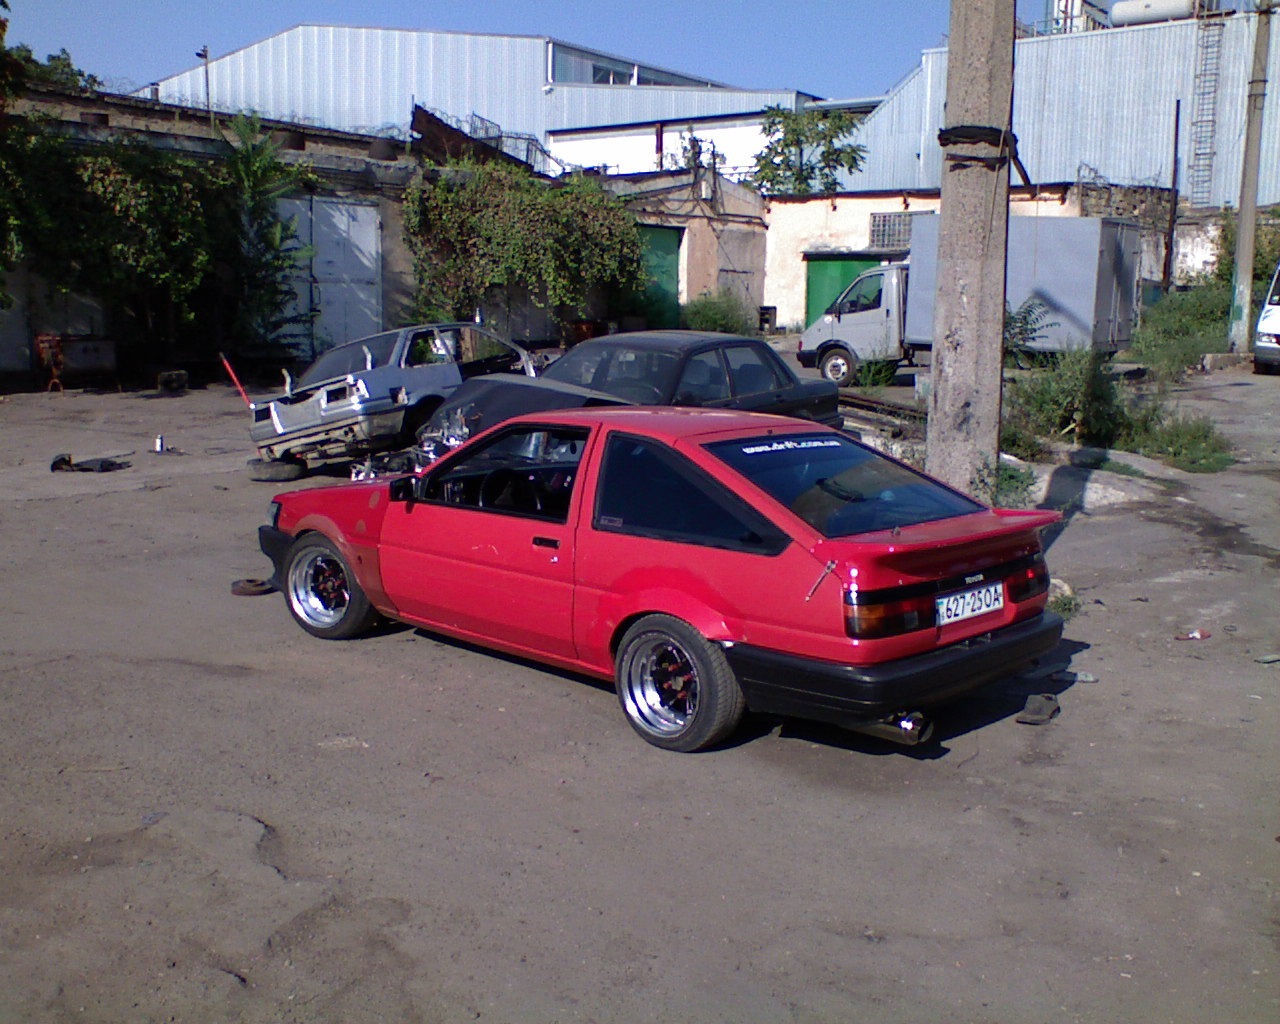 Tuning without picking up or how it happens  not for the faint of heart - Toyota Sprinter Trueno 15 L 1987